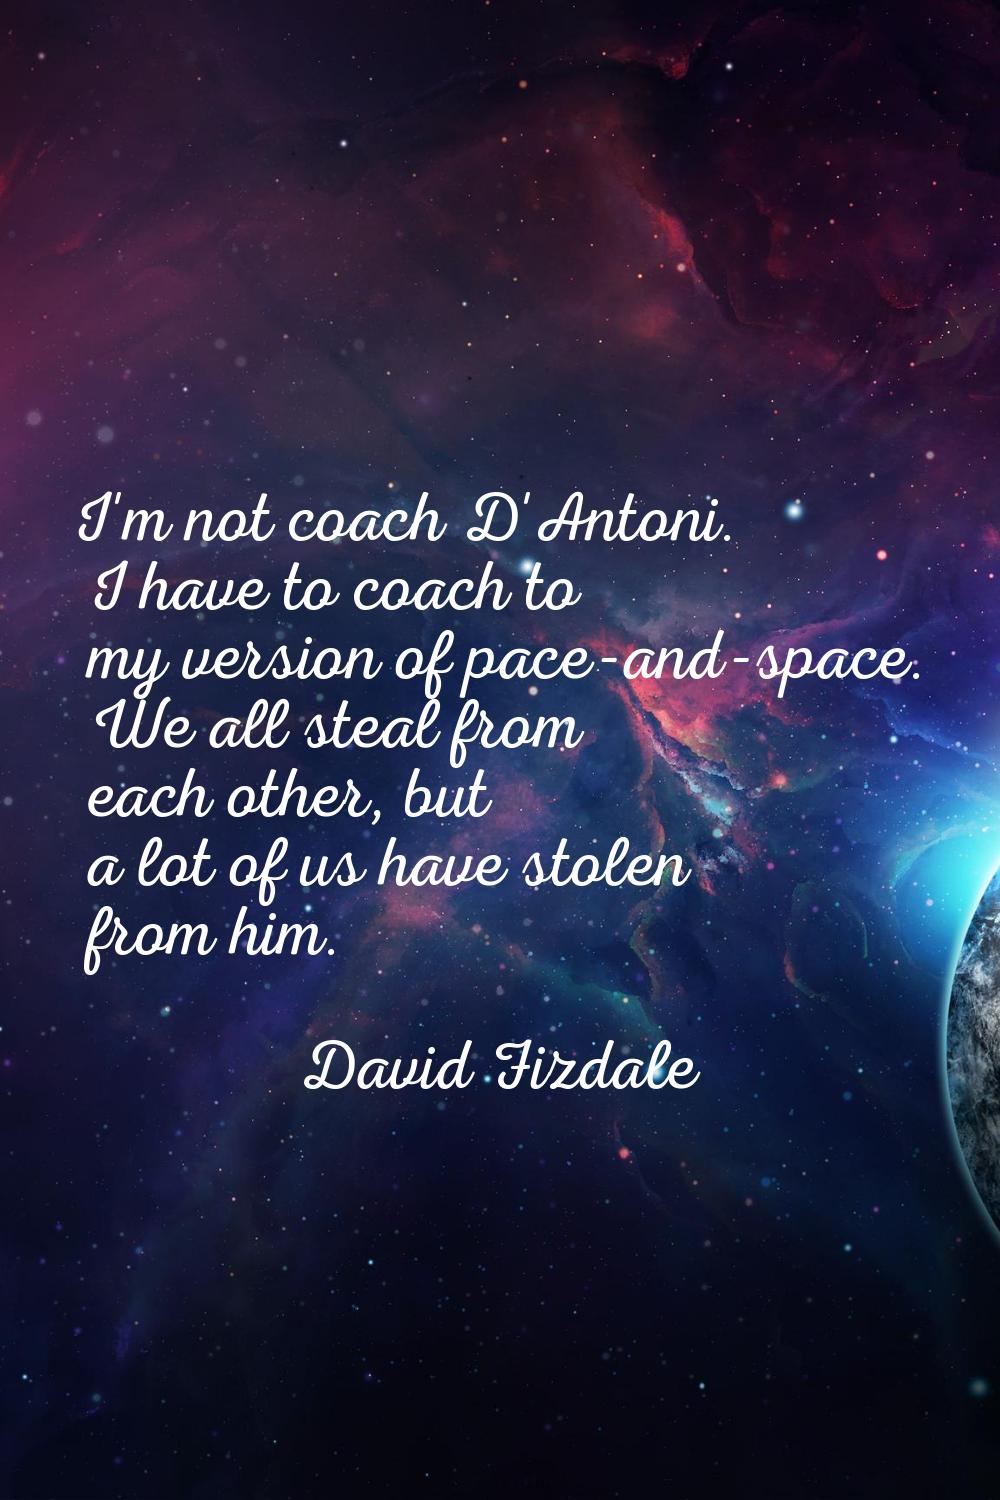 I'm not coach D'Antoni. I have to coach to my version of pace-and-space. We all steal from each oth